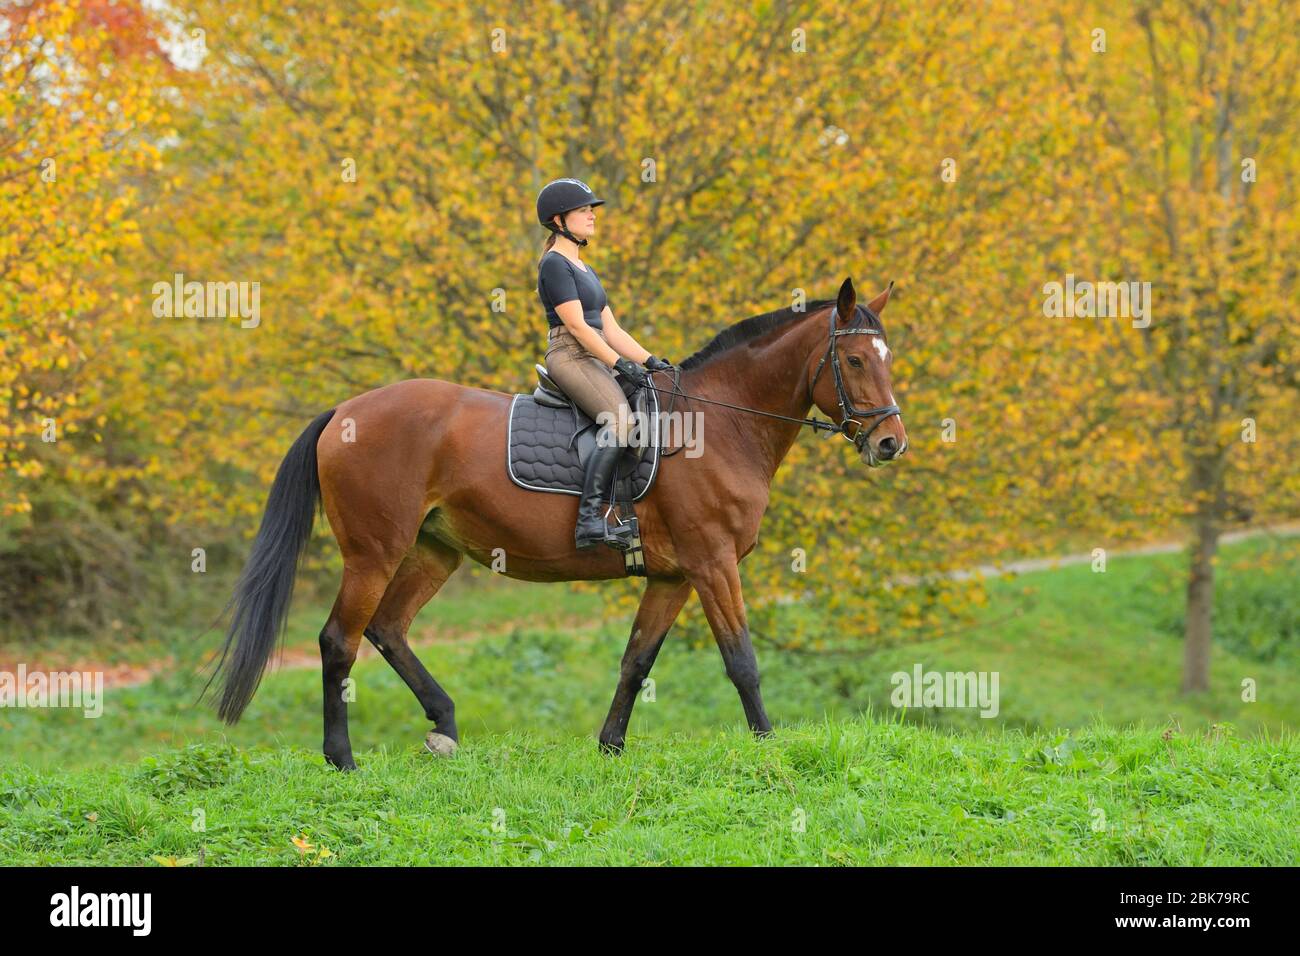 Rider on back of a Westfalian horse hacking at a warm autunn day Stock Photo